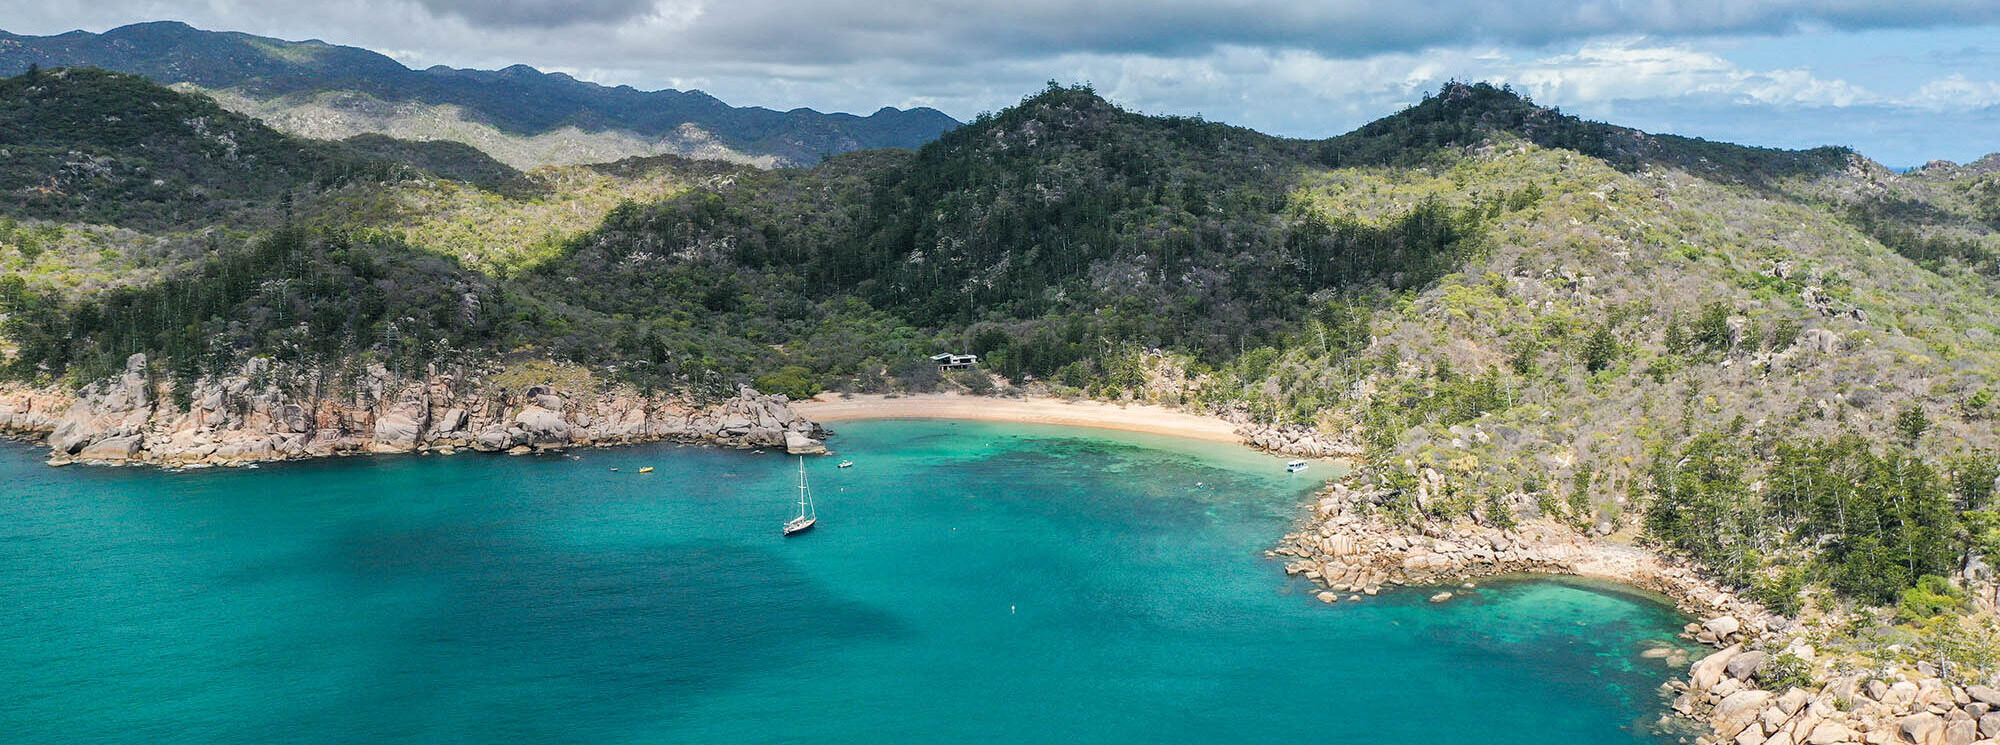 Magnetic Island Helicopter Flights Tours & Charters